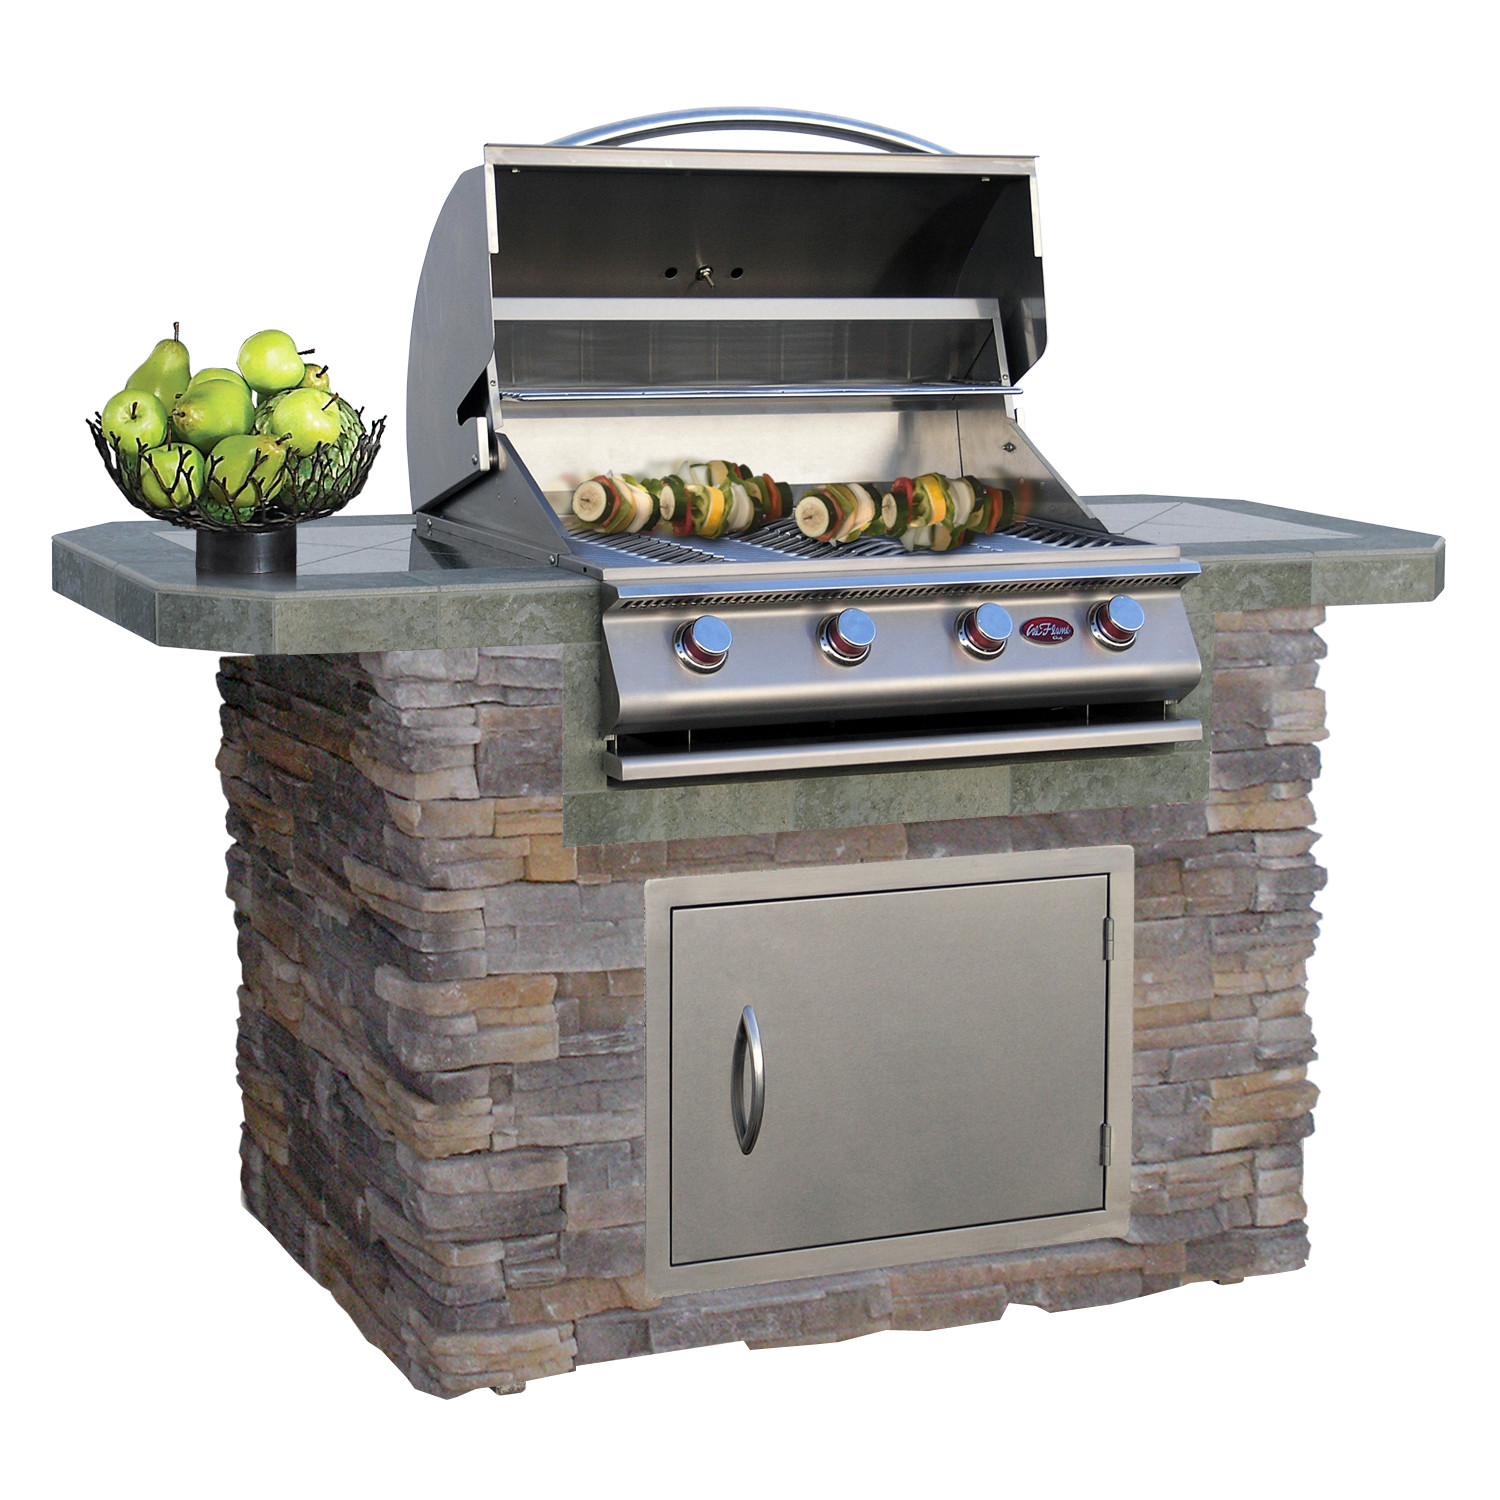 Outdoor Kitchen Gas Grills
 Cal Flame 6 Natural Stone and Tile Grill Island with 4